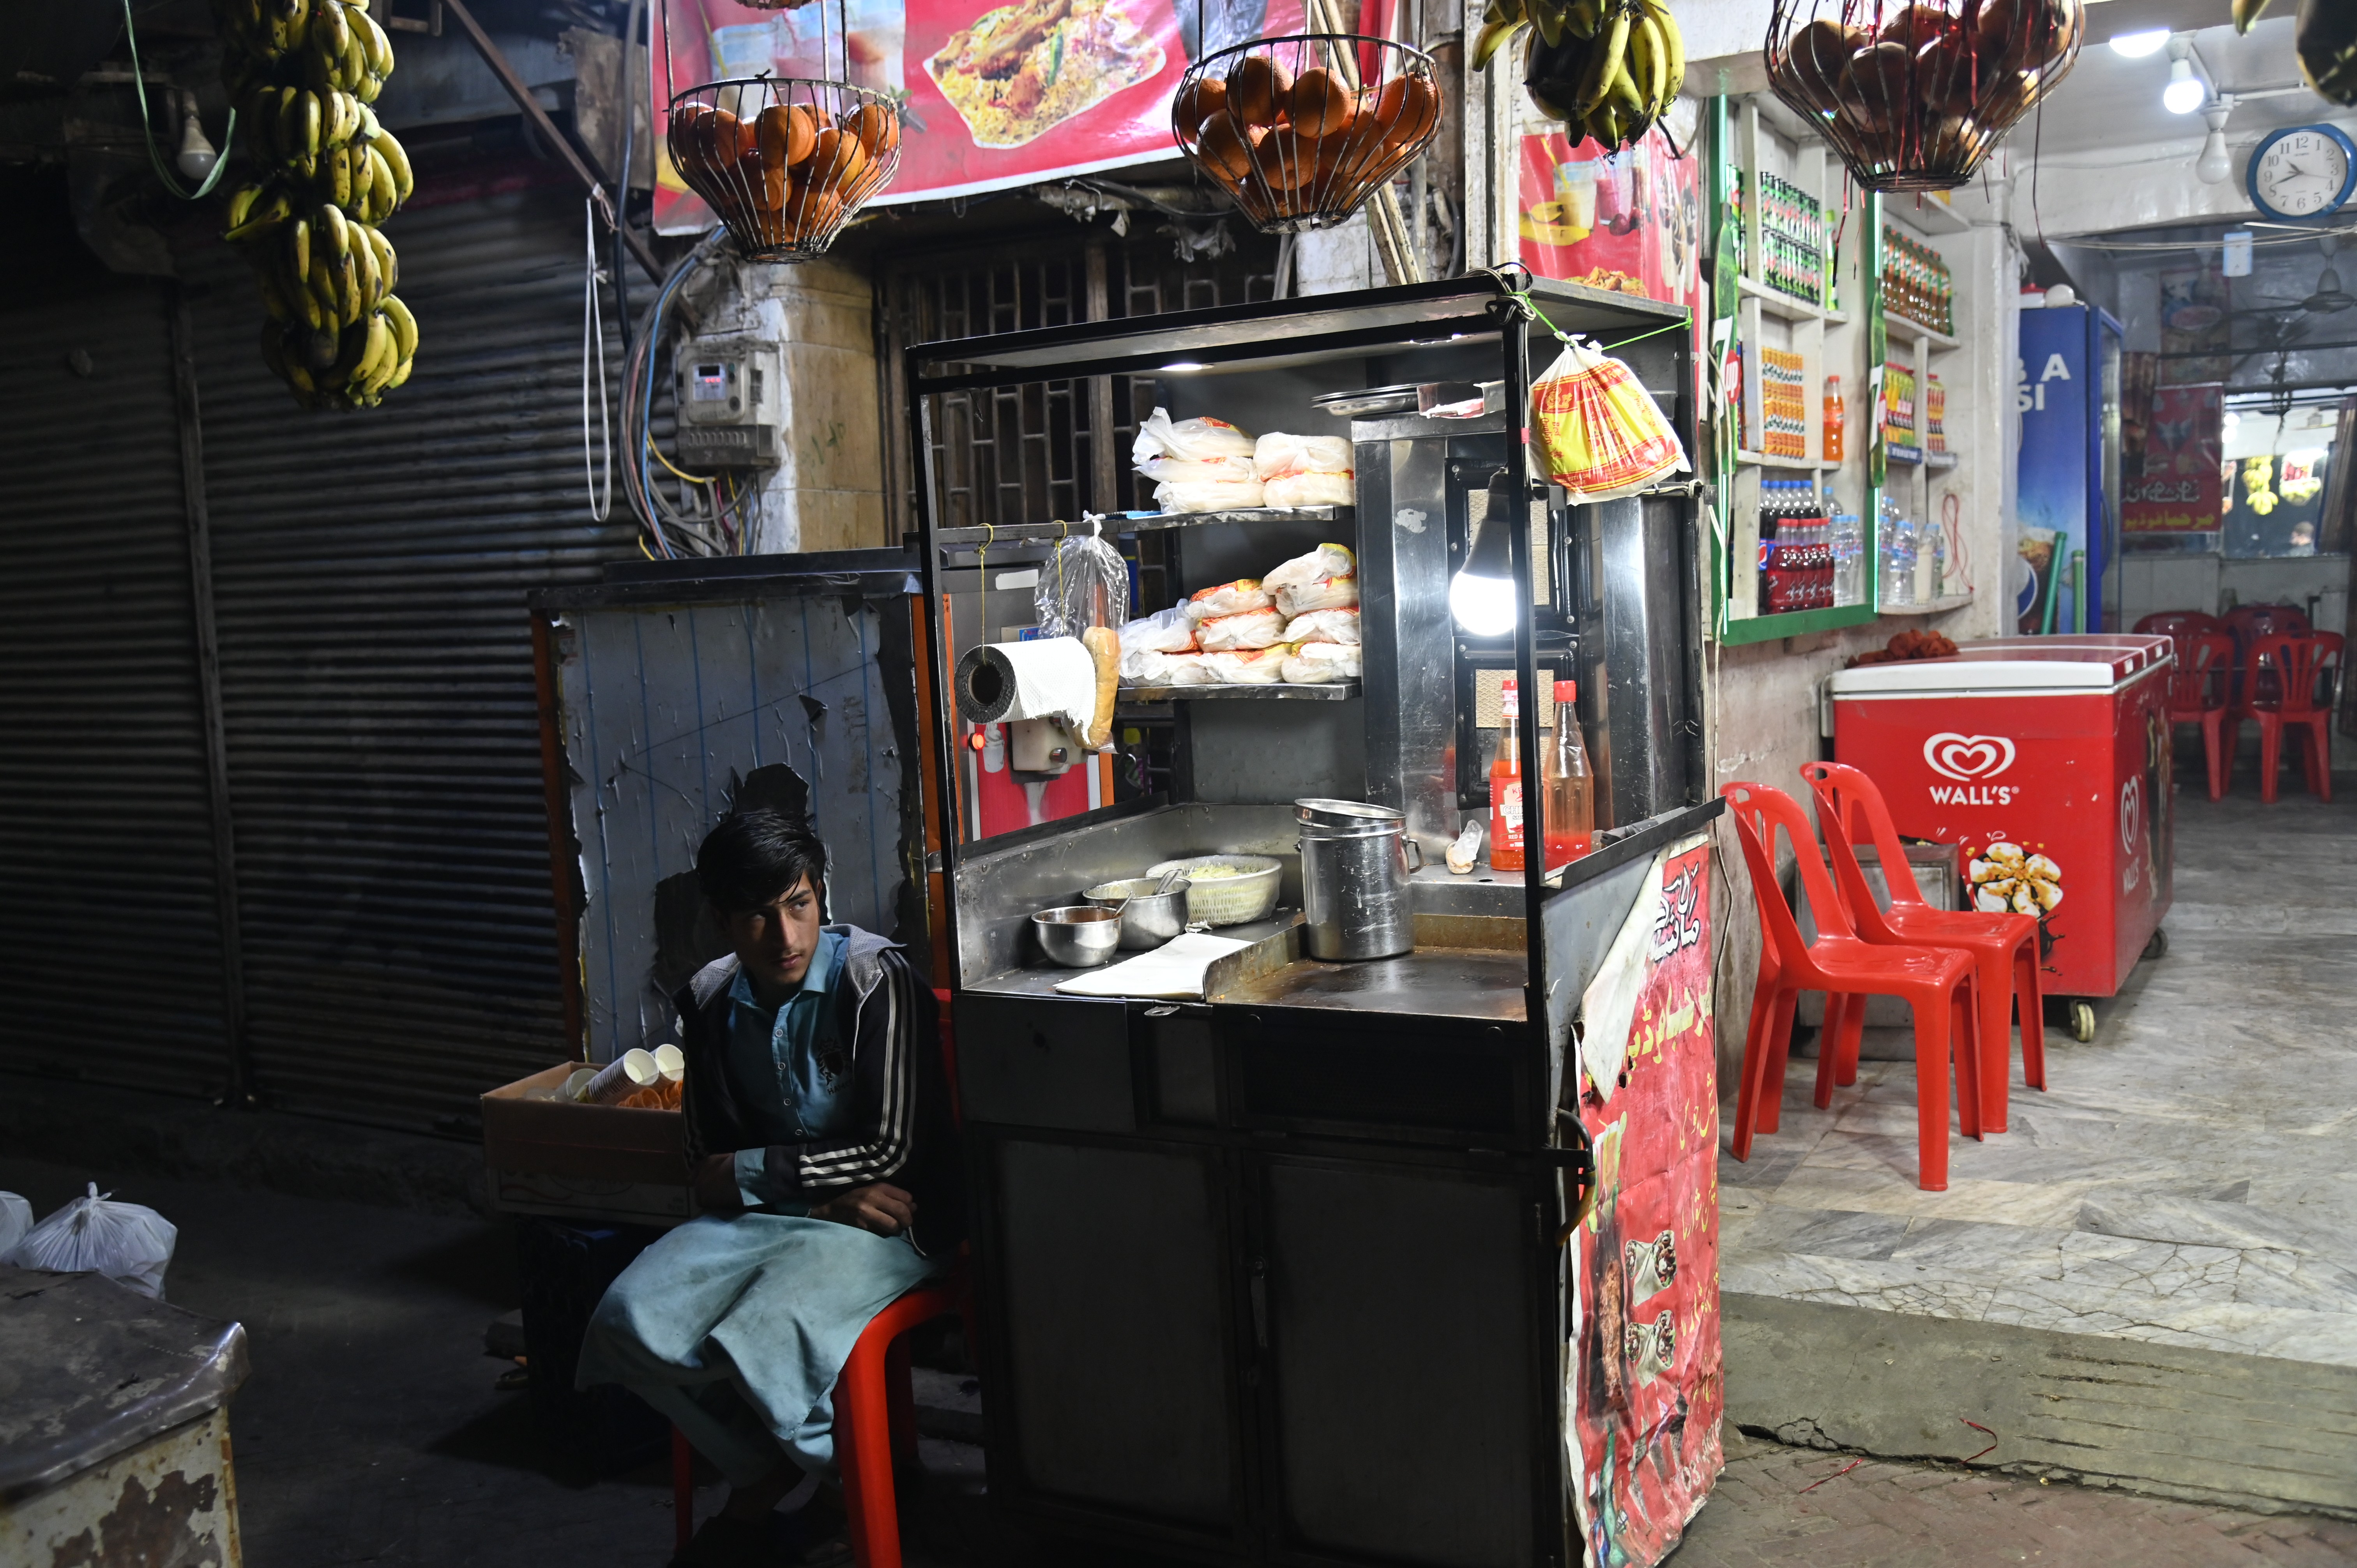 A boy sitting next to his stall selling shawarma, consisting of meat cut into thin slices, stacked in an inverted cone